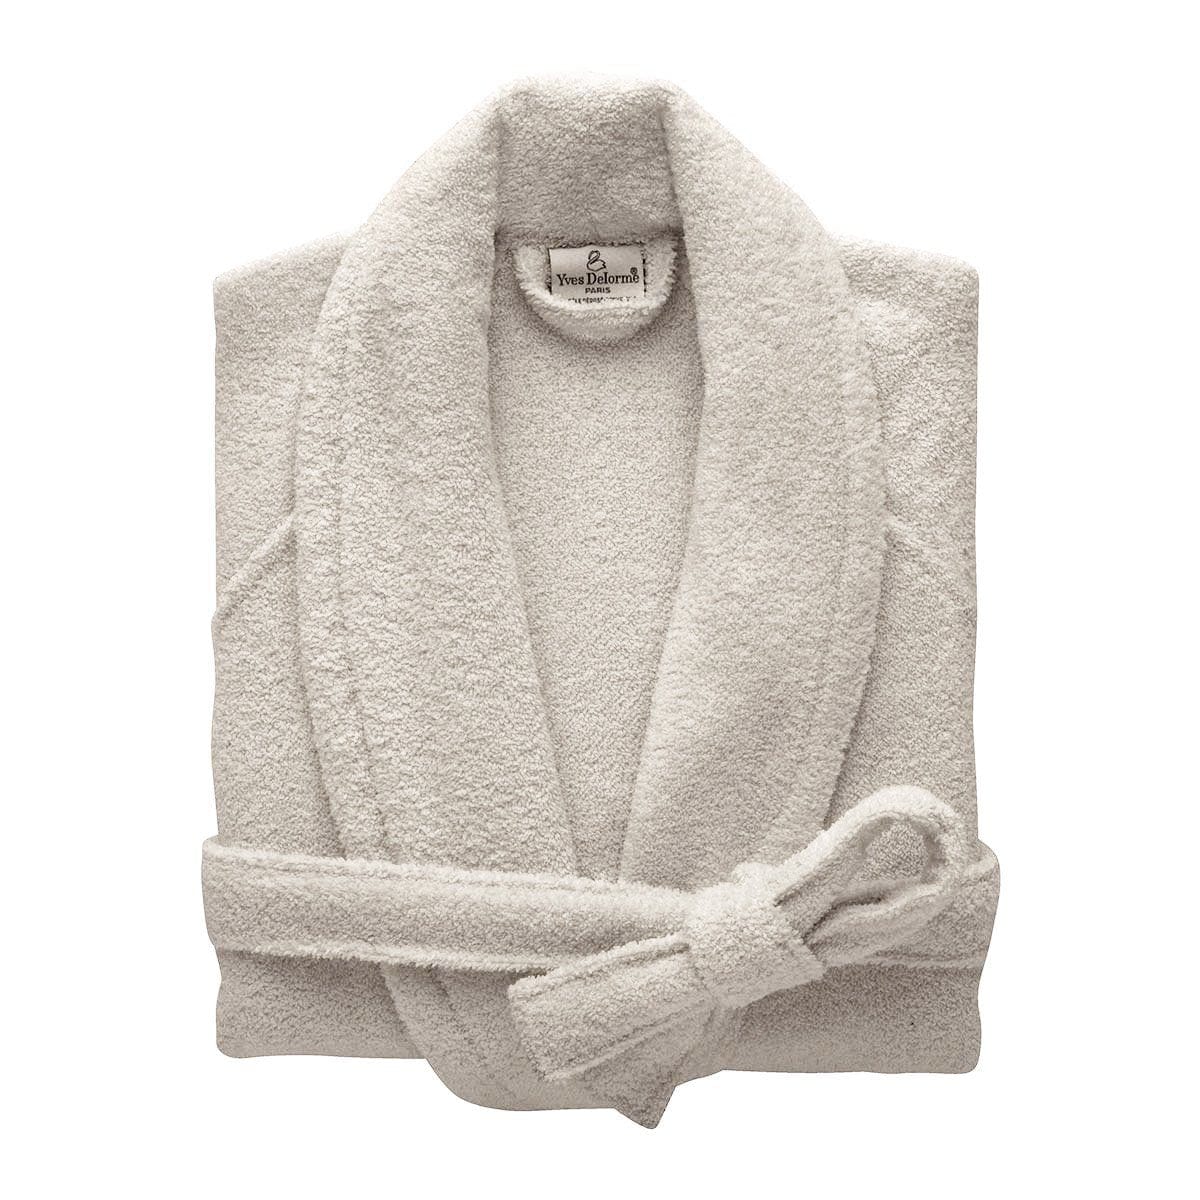 Robes Etoile Bath Robe by Yves Delorme Pierre / S Yves Delorme